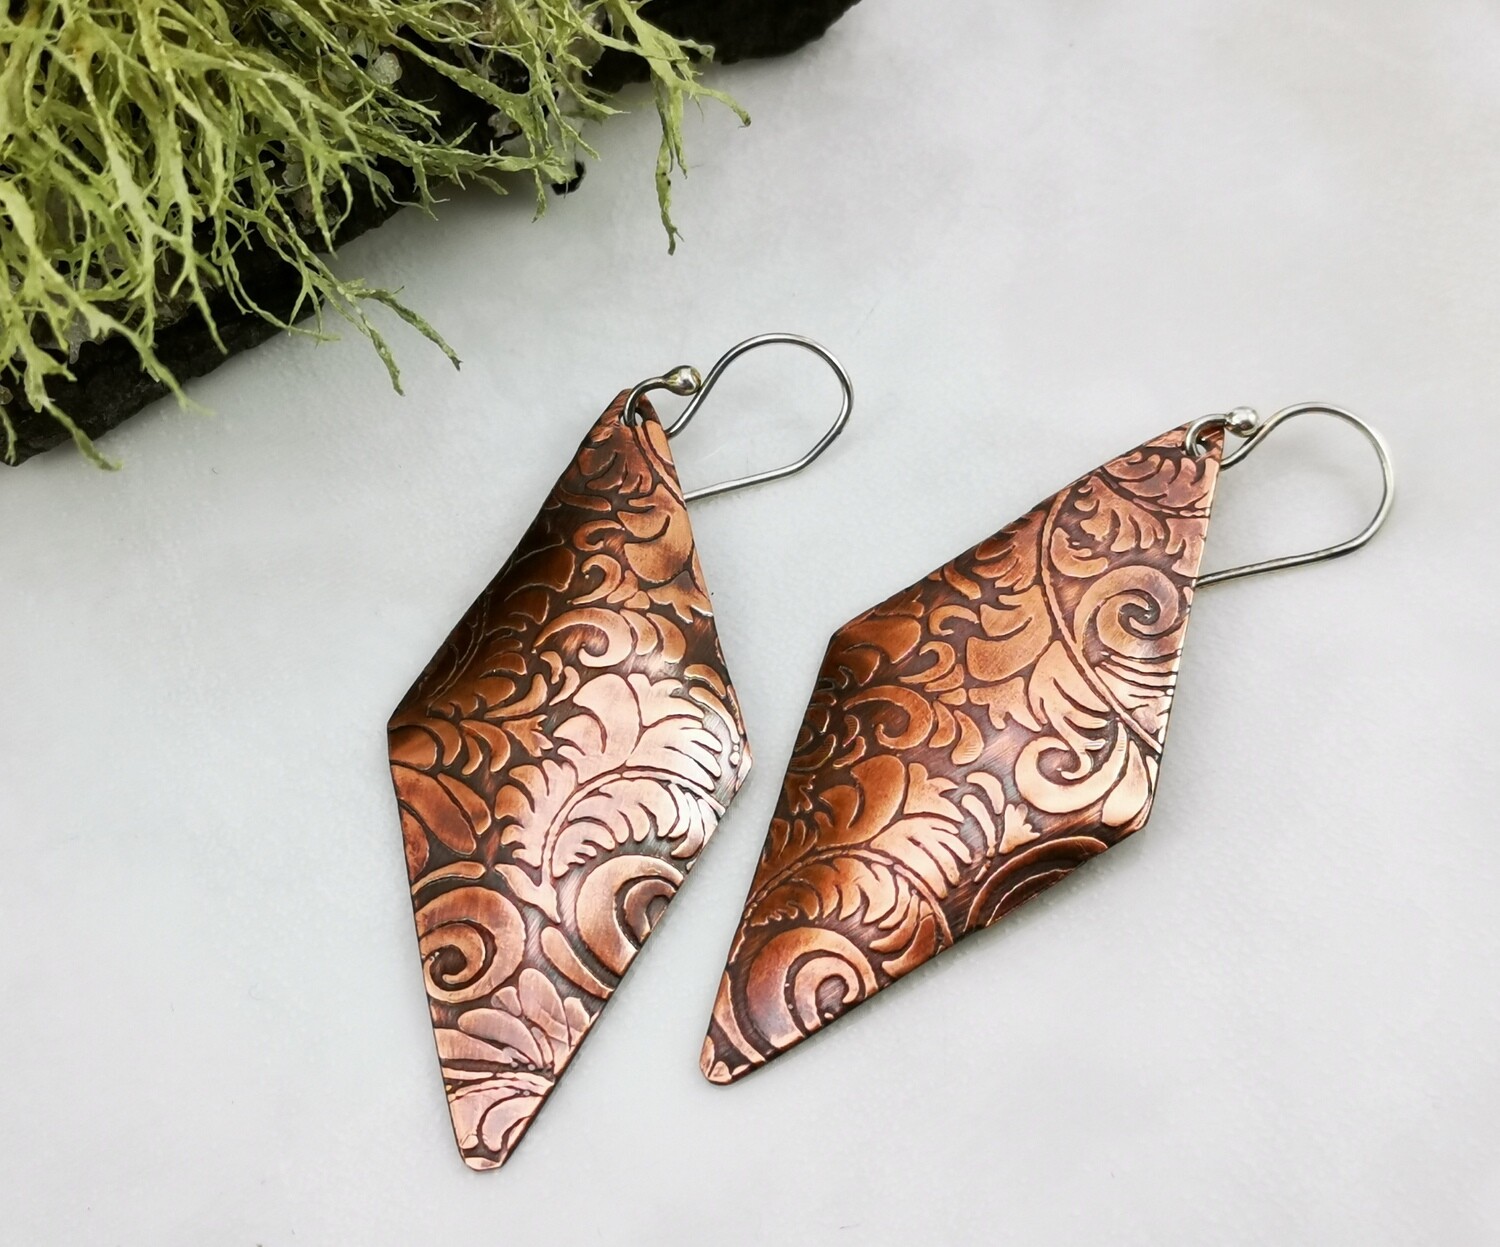 Long Sleek Diamond Shaped Copper Earrings with a Tooled Leather Pattern